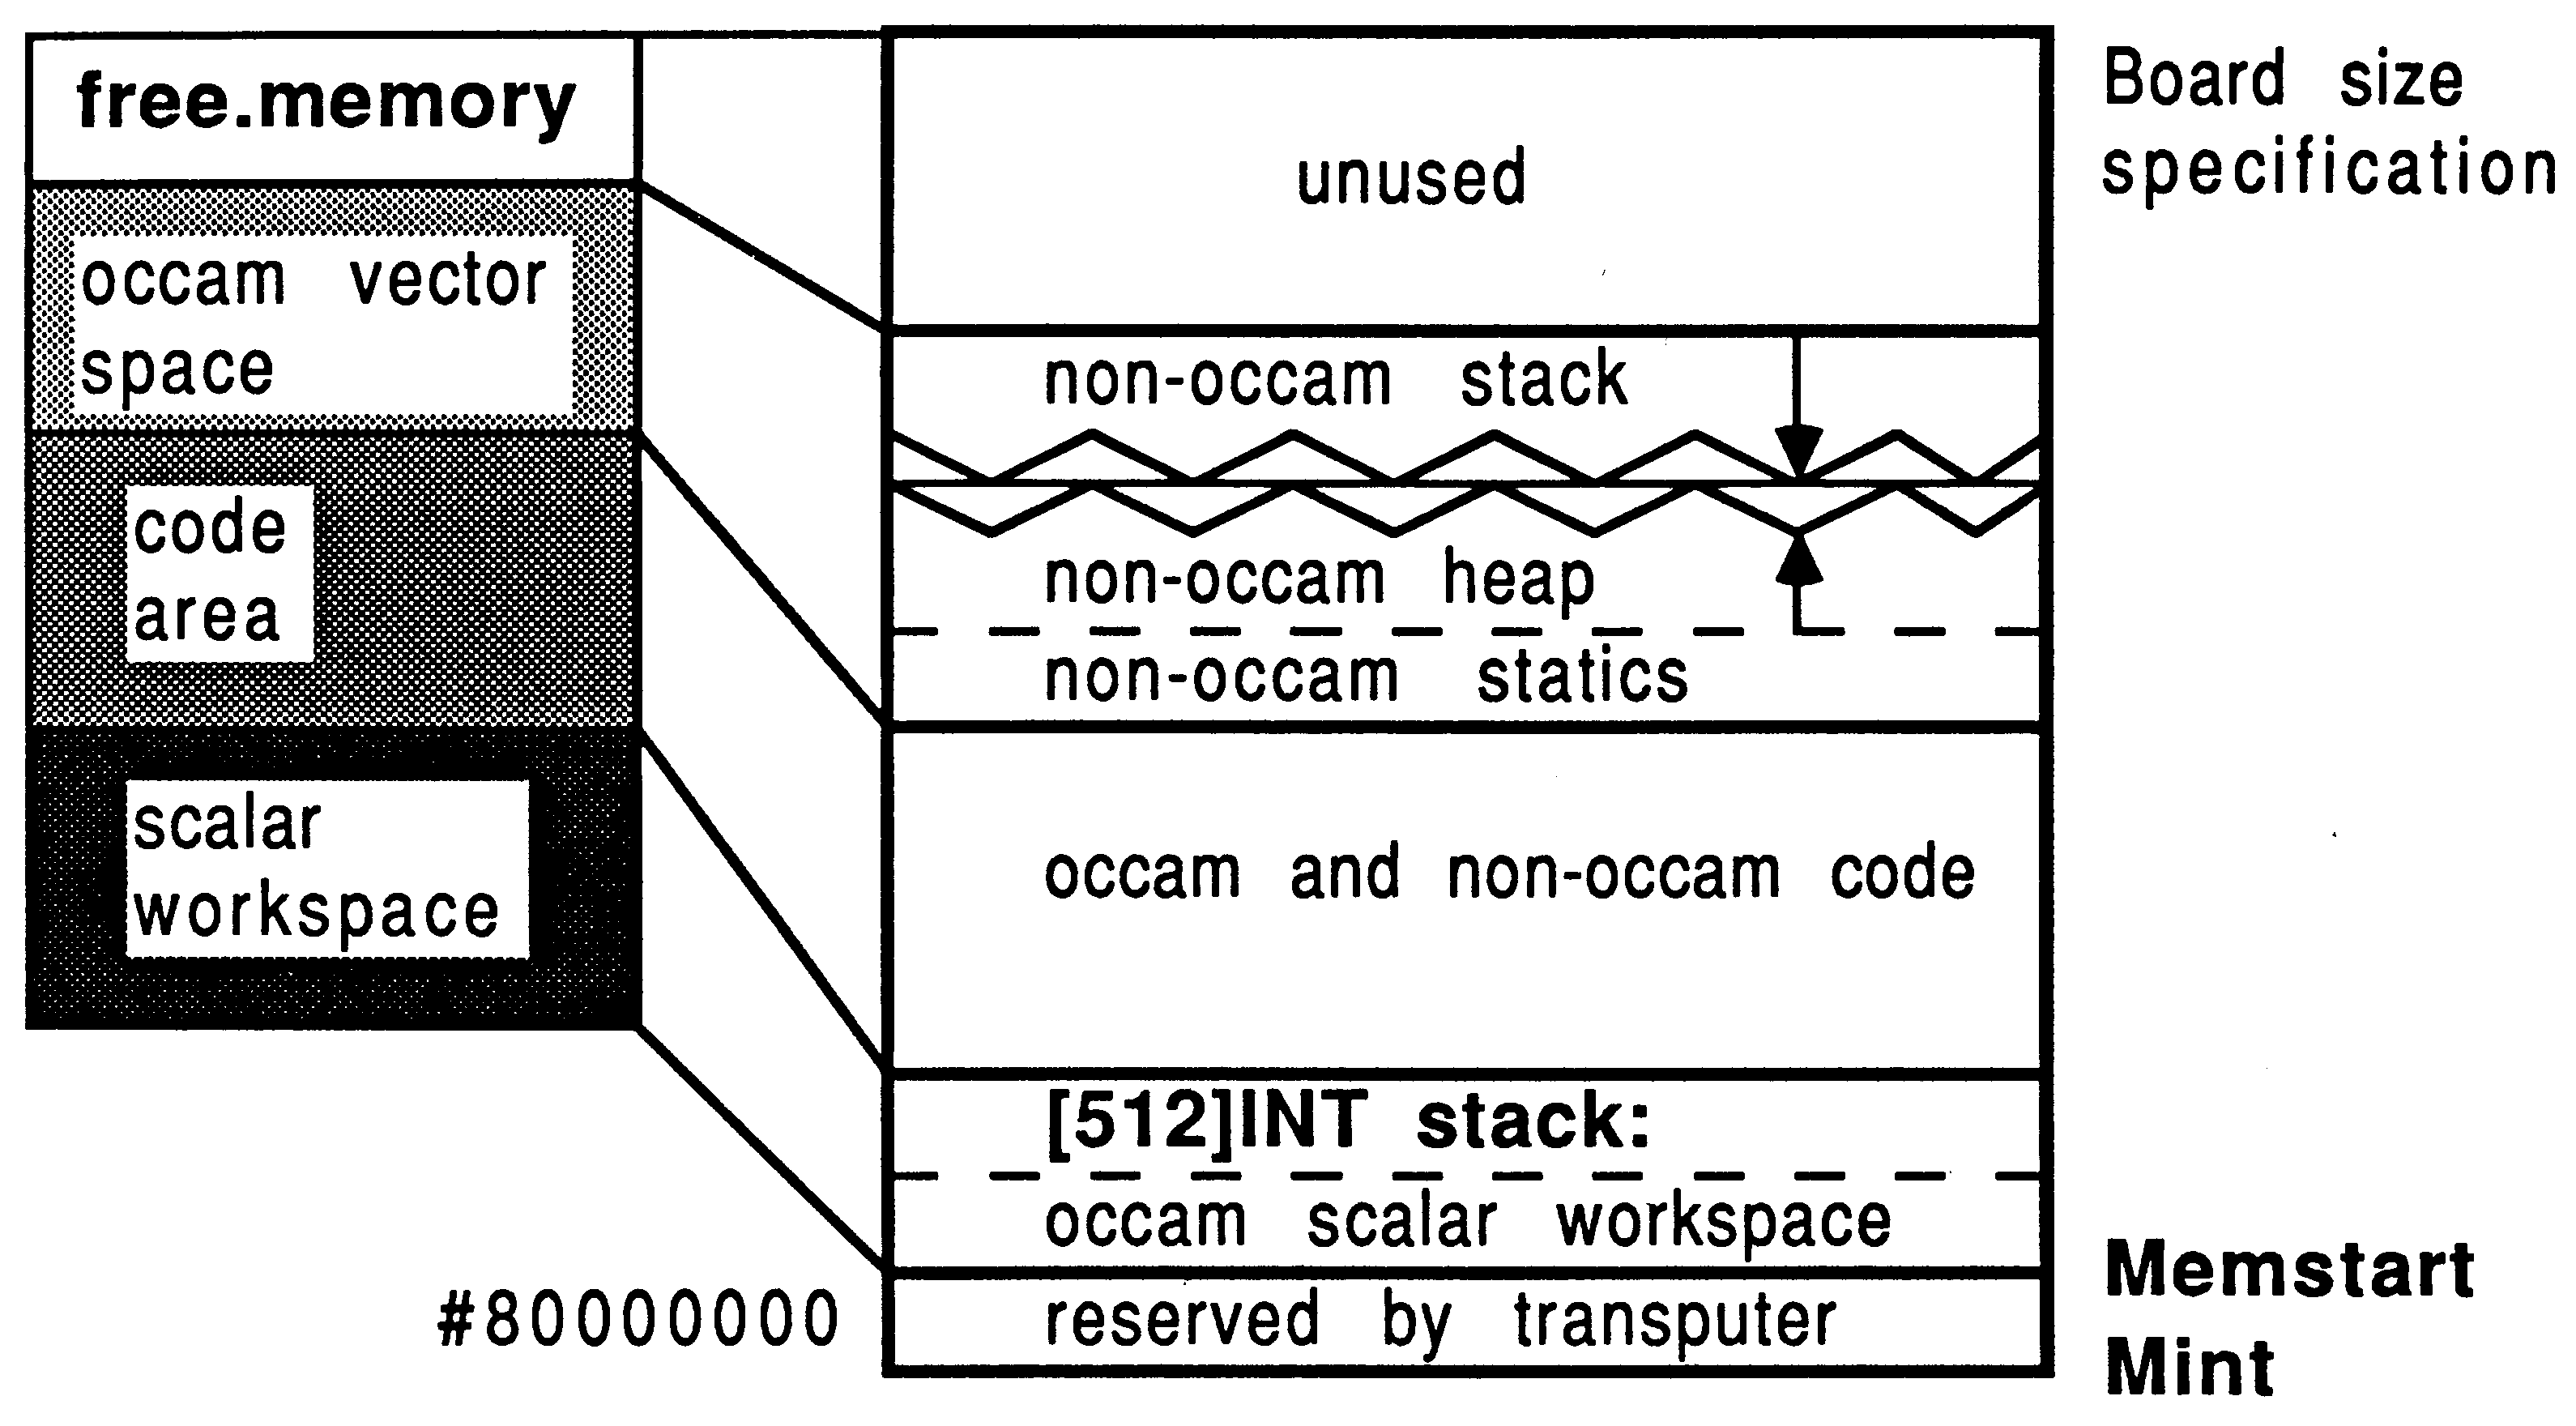 Allocating memory from
occam vector space